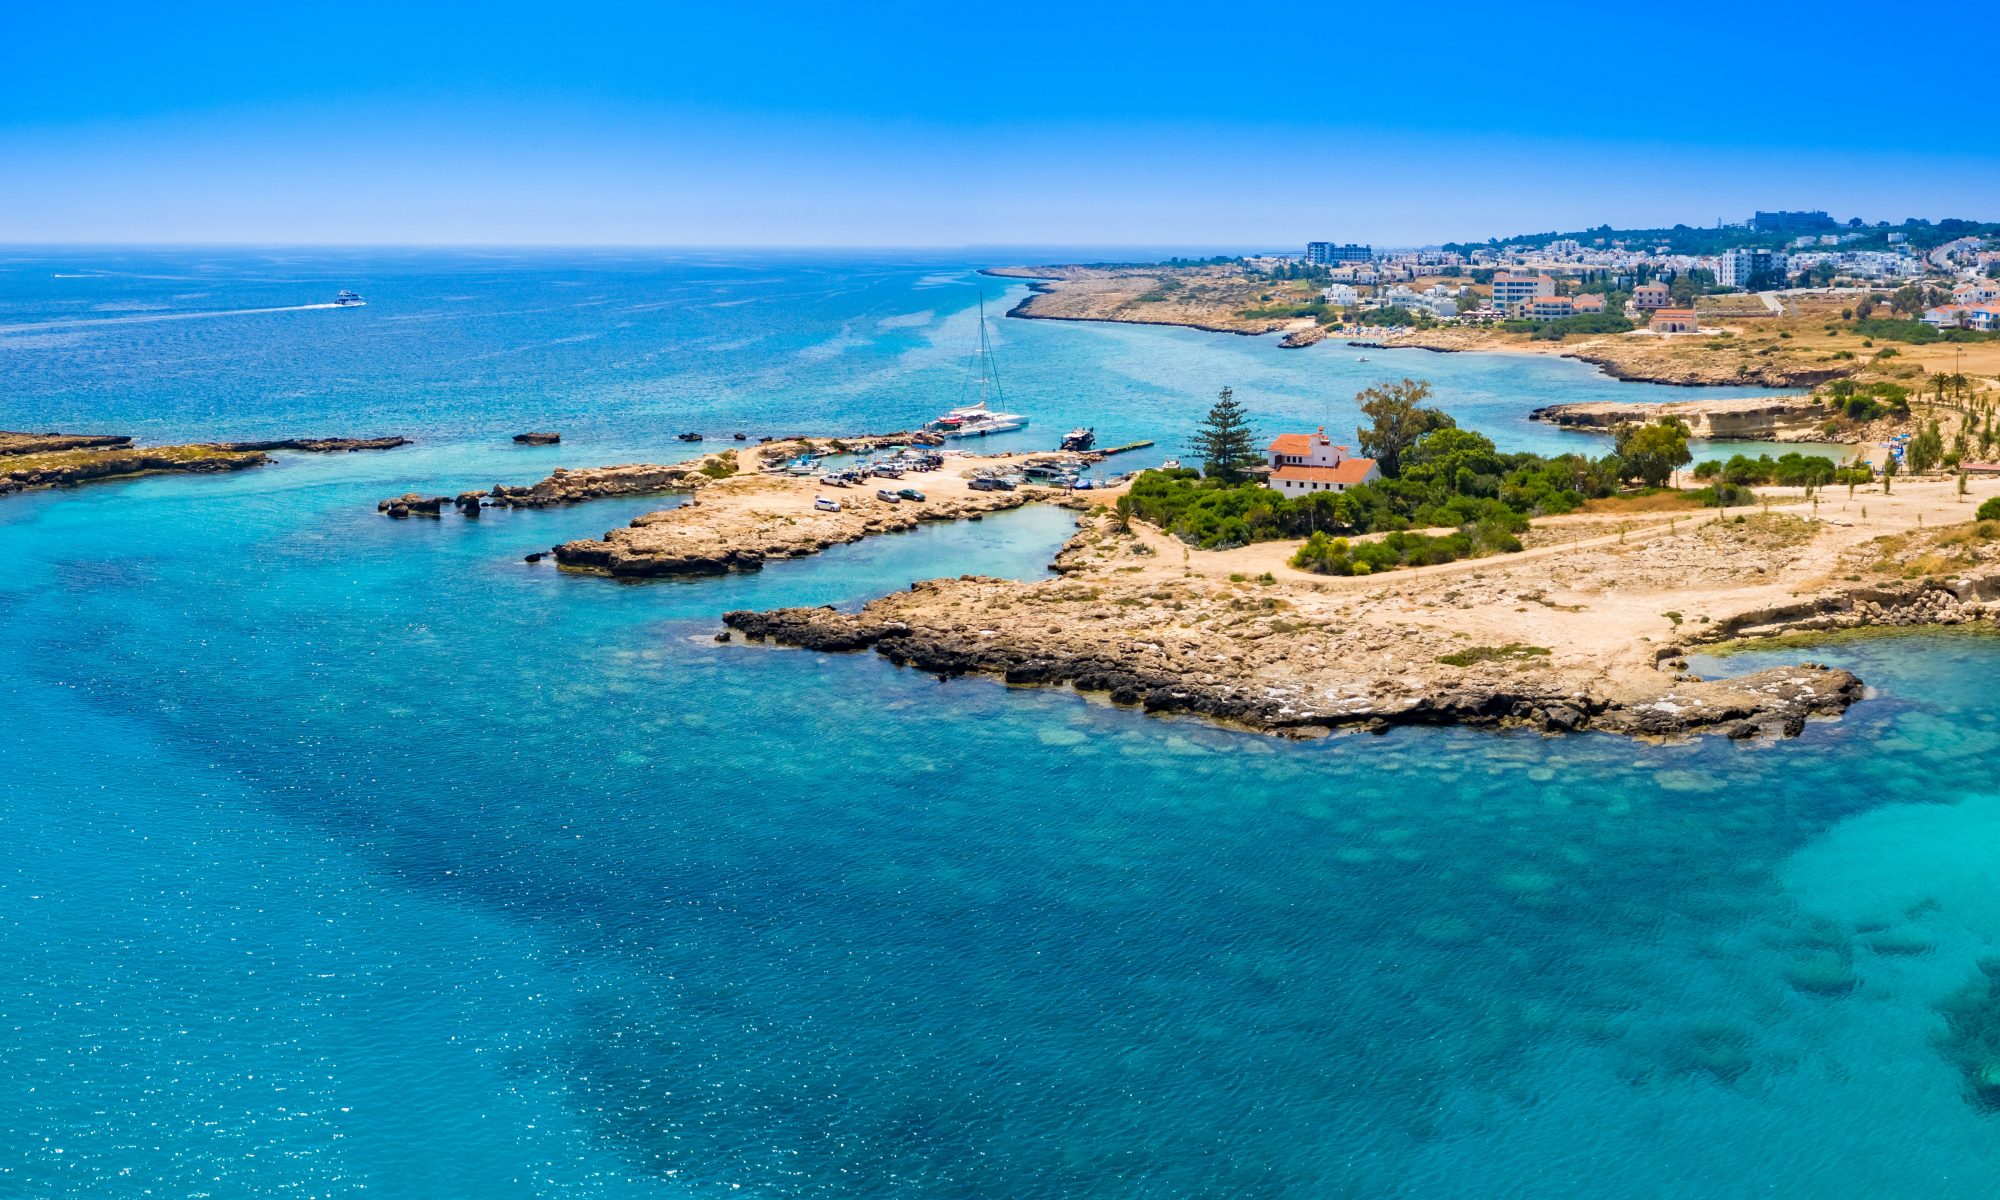 View of the coast of Cyprus where boat tour providers offer their excursions.